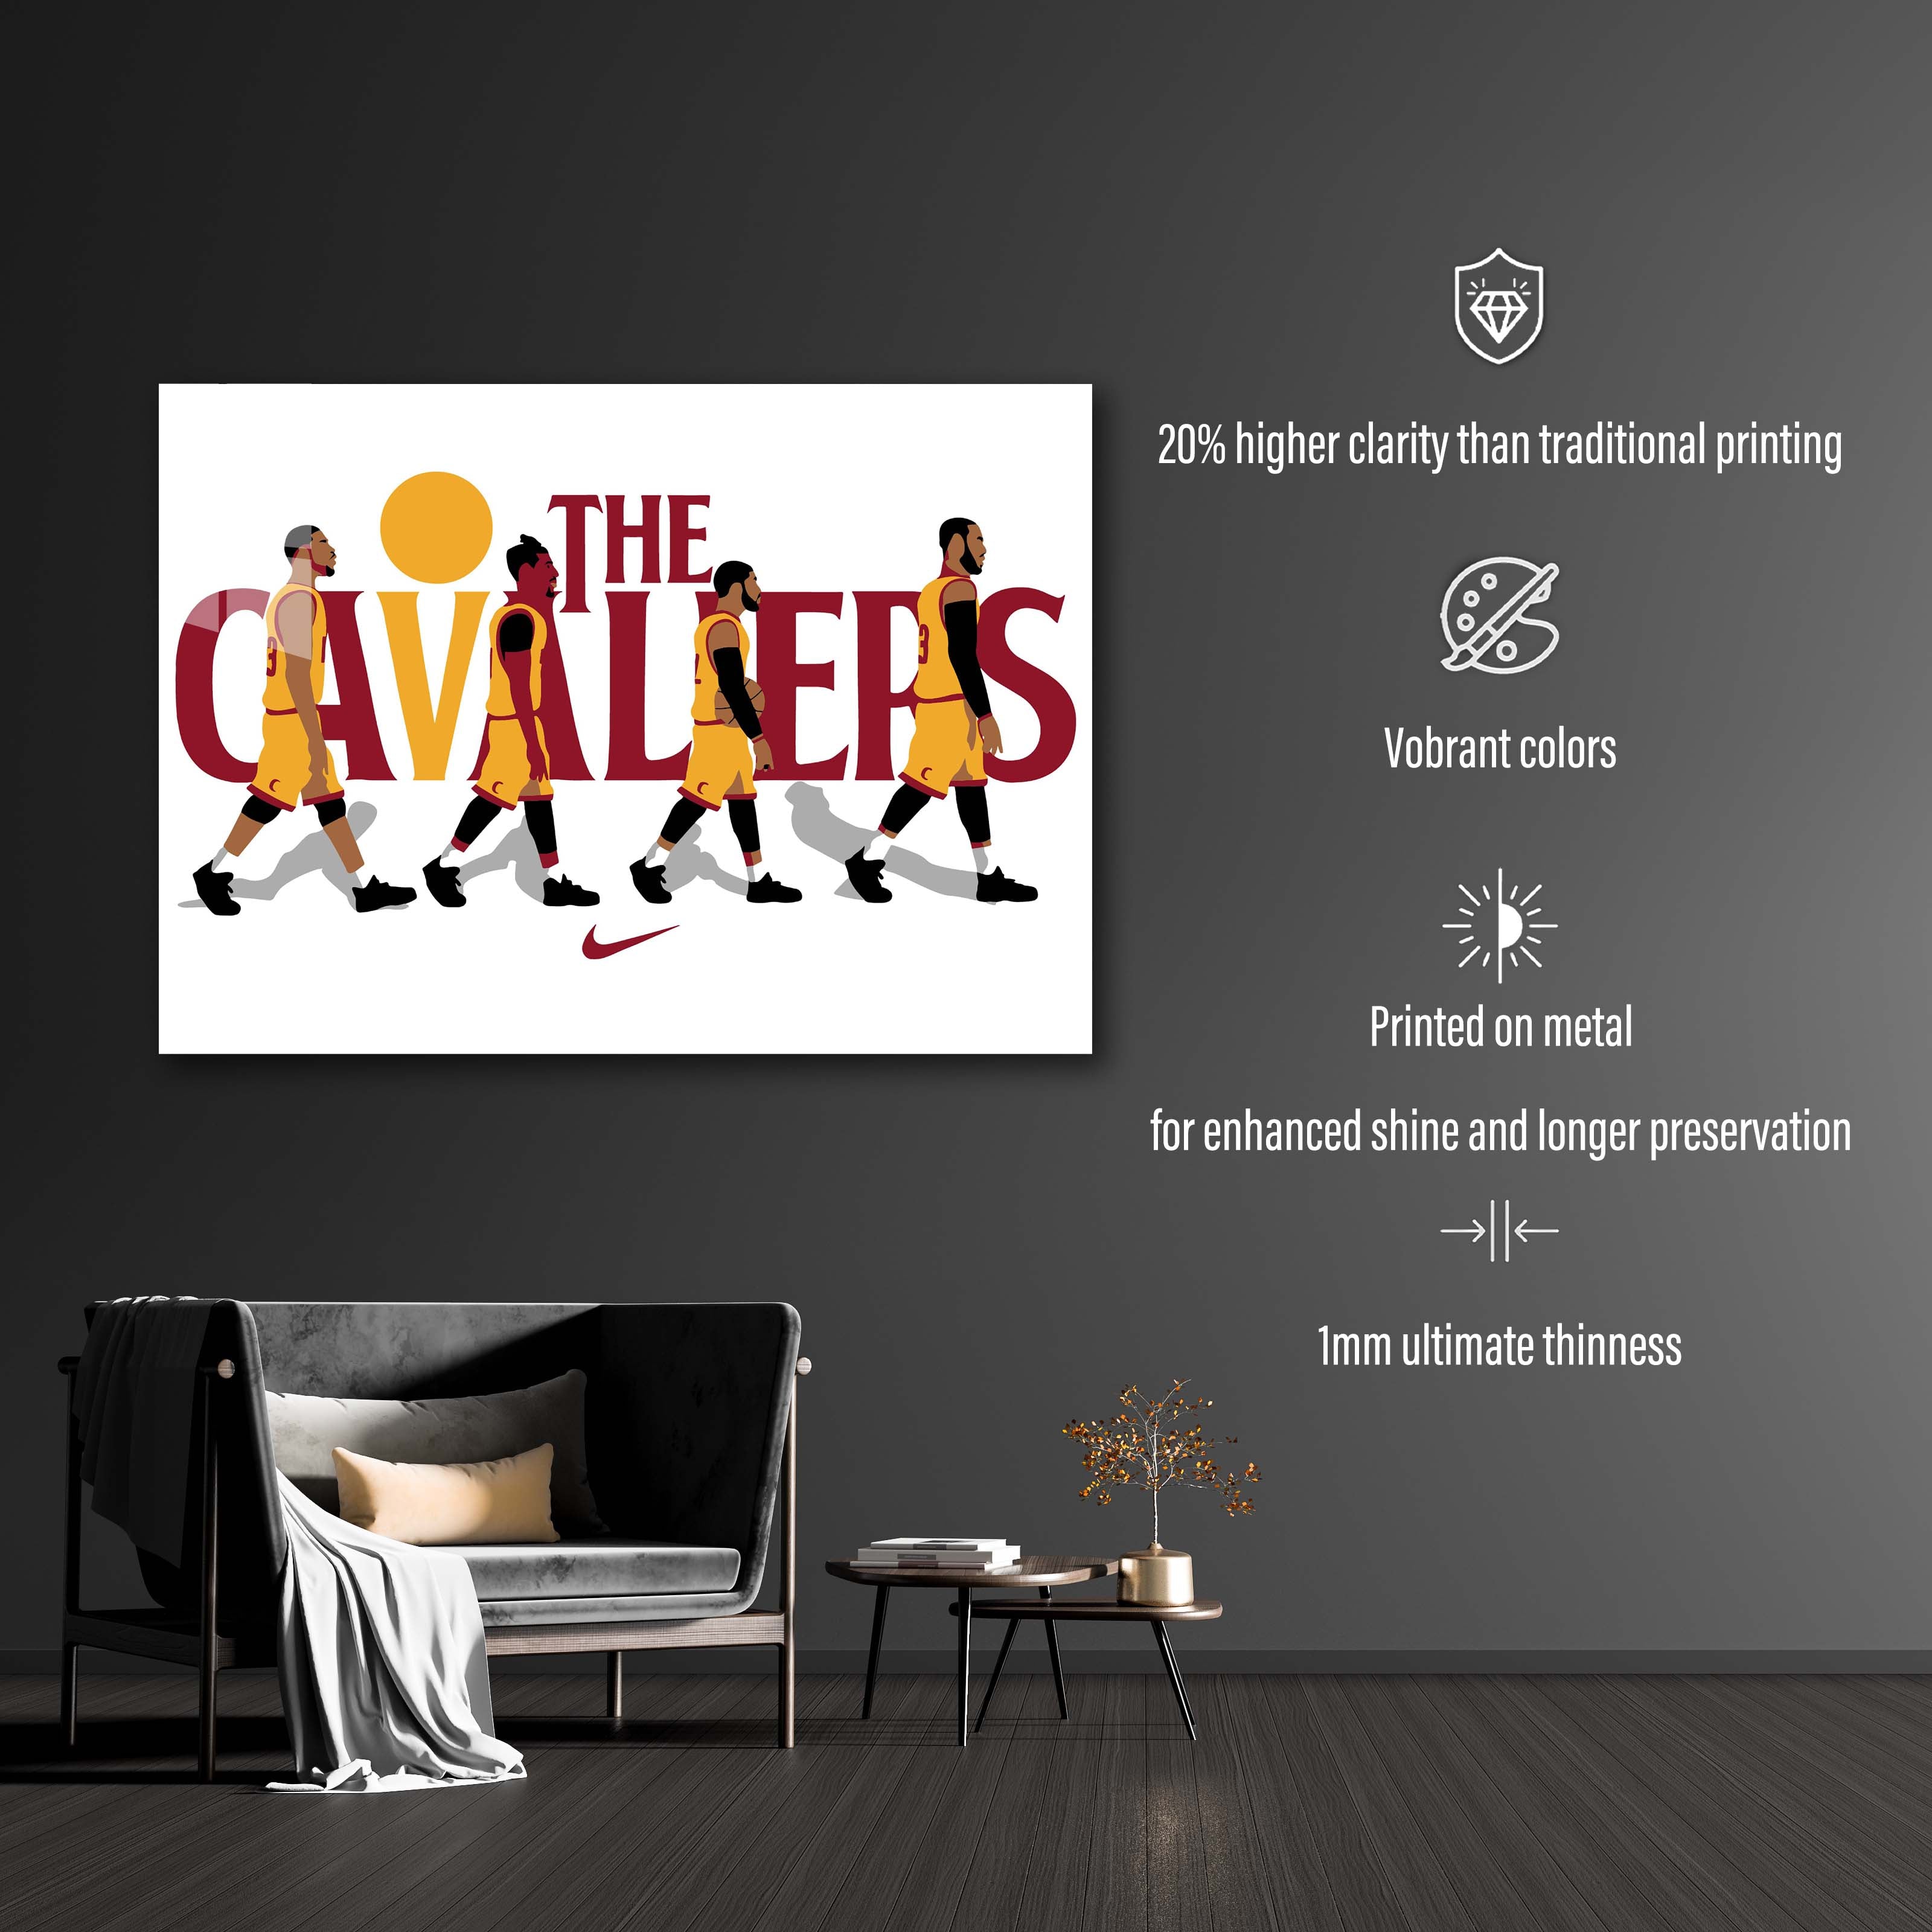 The Calvaliers-designed by @My Kido Art